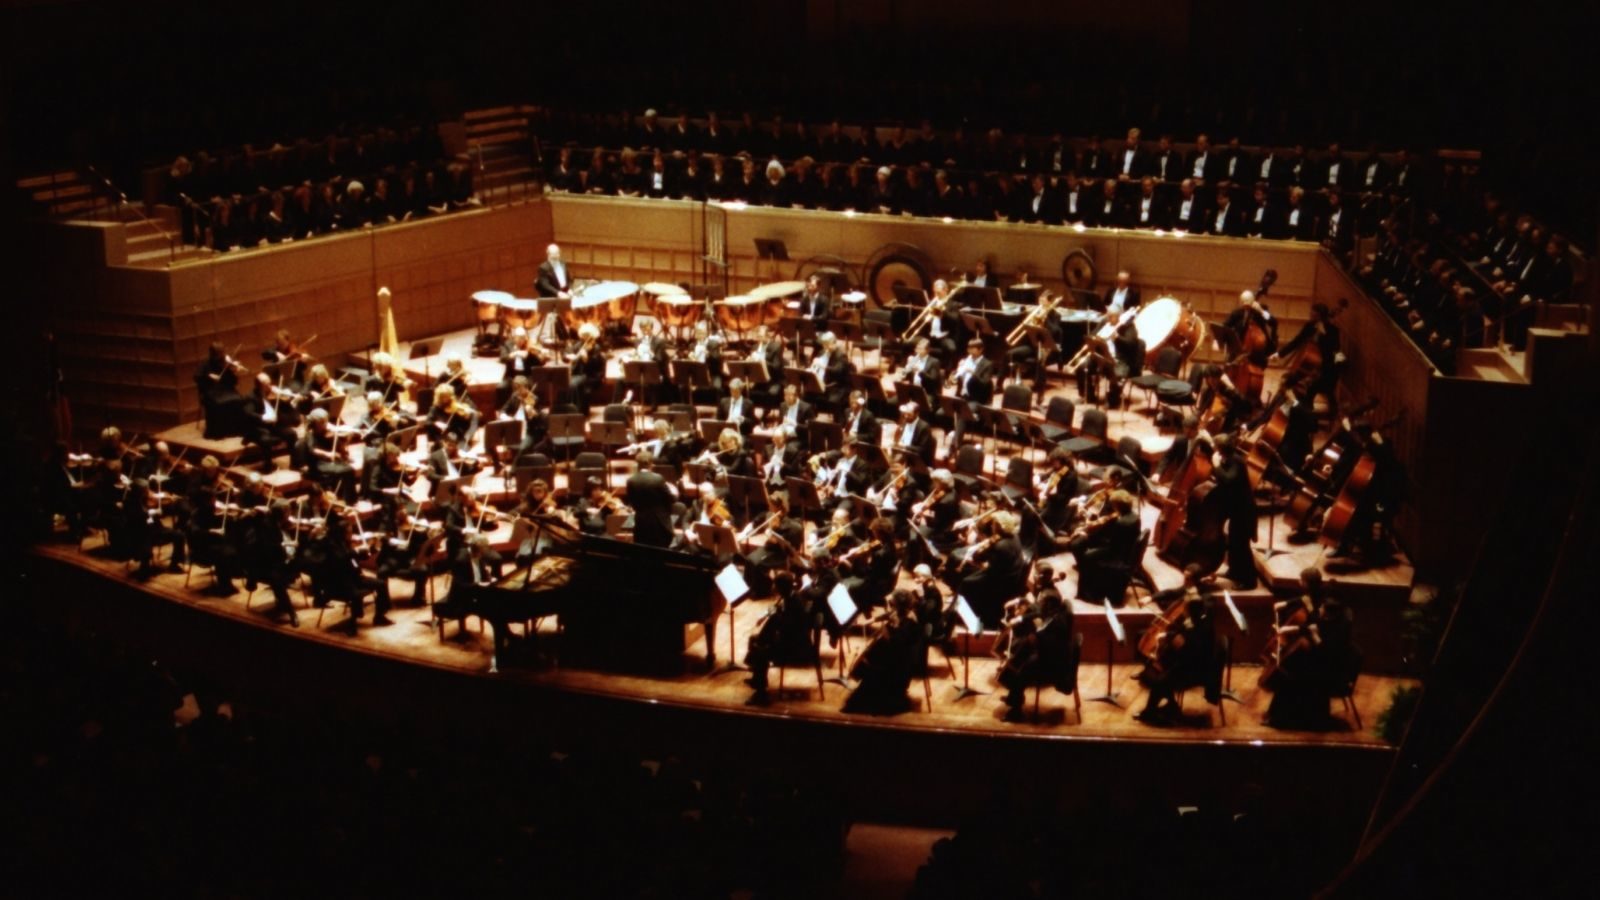 Pianist Van Cliburn performs with the Dallas Symphony Orchestra in the Meyerson Symphony Center 1989